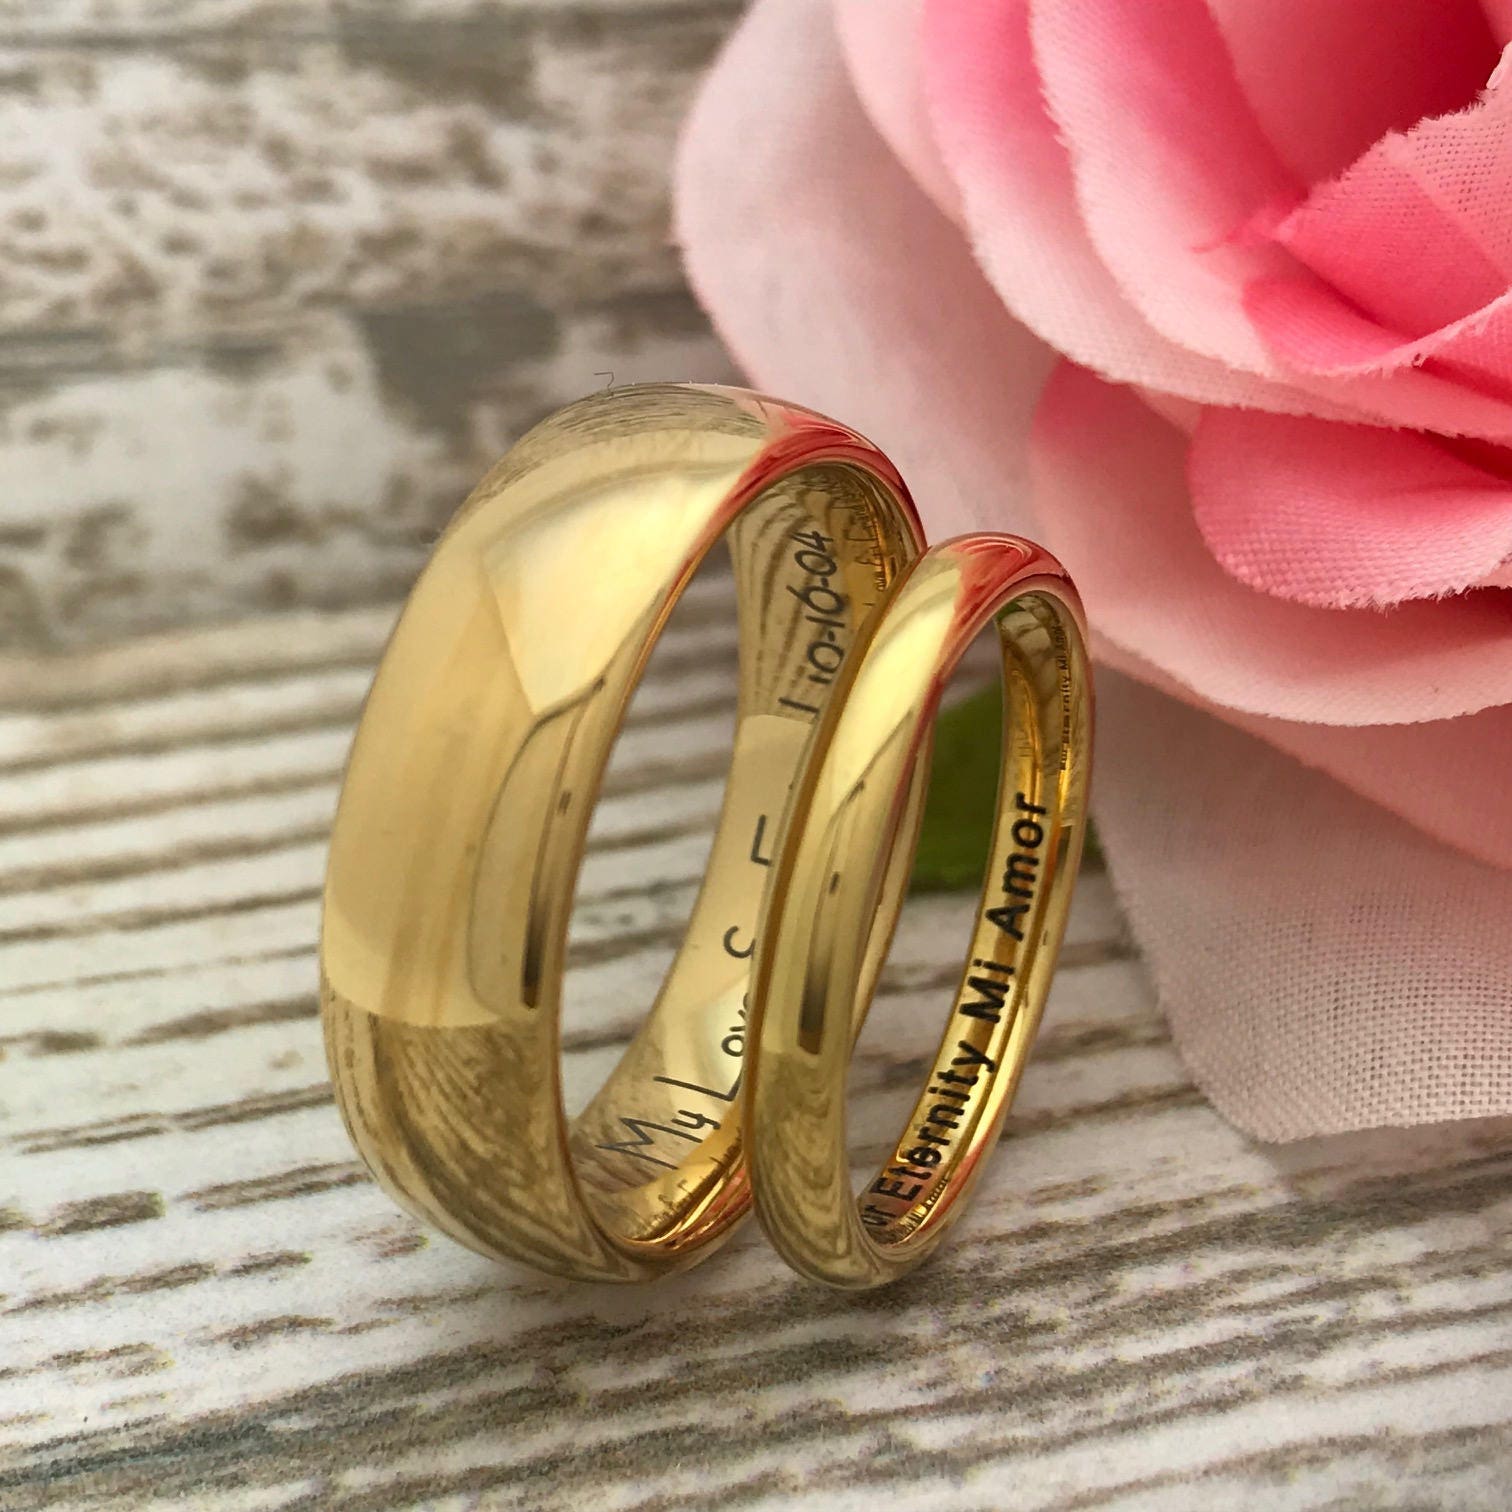 7mm/3mm Tungsten Wedding Rings His and Hers Ring Personalize | Etsy